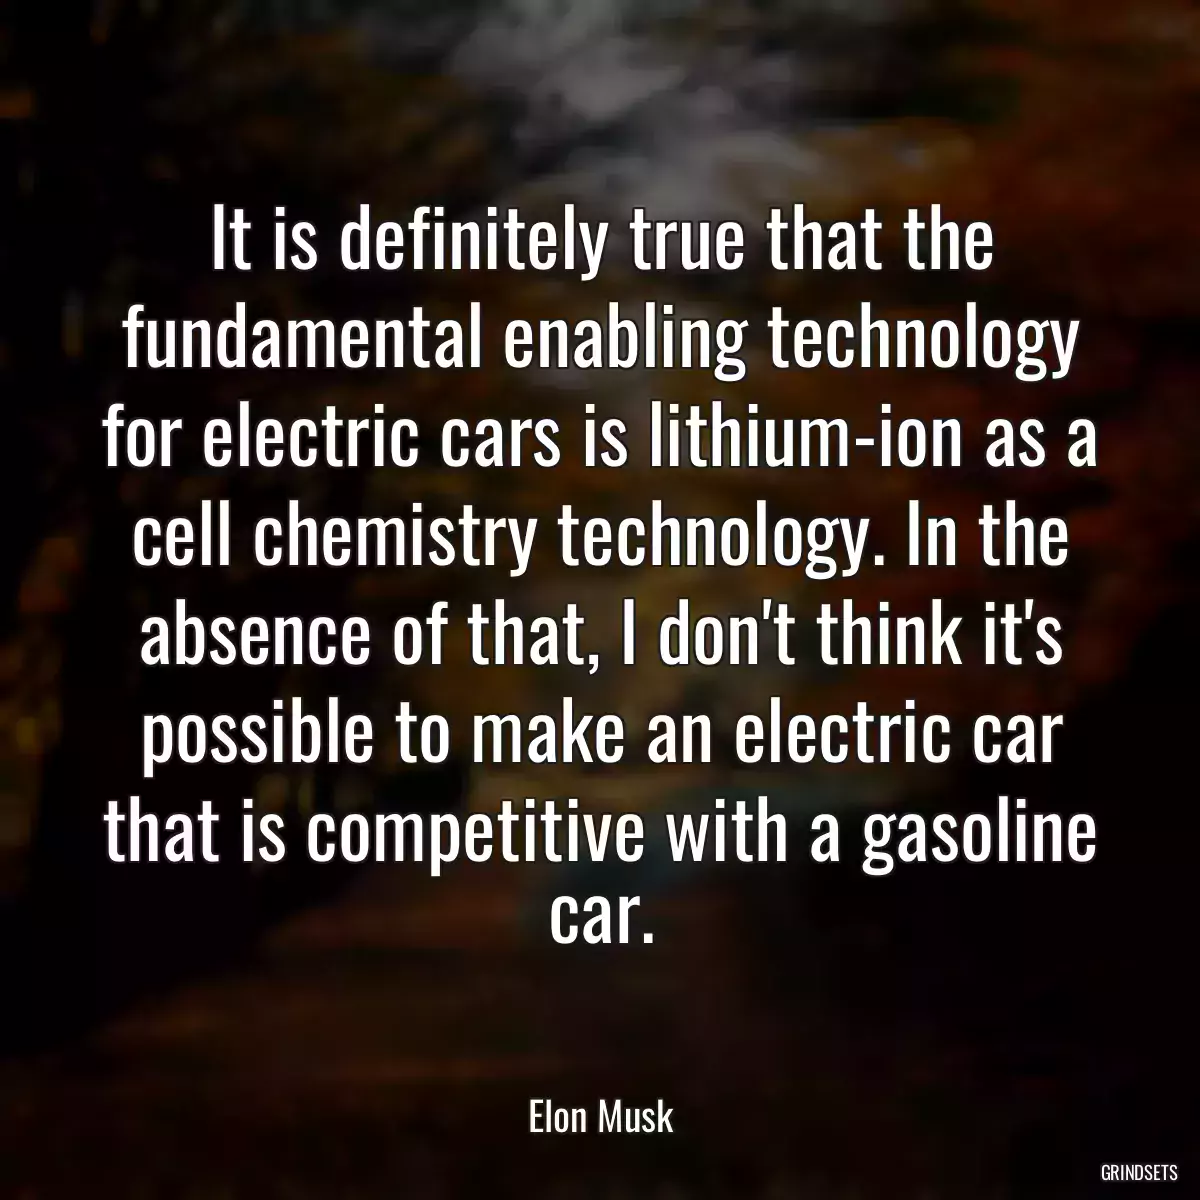 It is definitely true that the fundamental enabling technology for electric cars is lithium-ion as a cell chemistry technology. In the absence of that, I don\'t think it\'s possible to make an electric car that is competitive with a gasoline car.